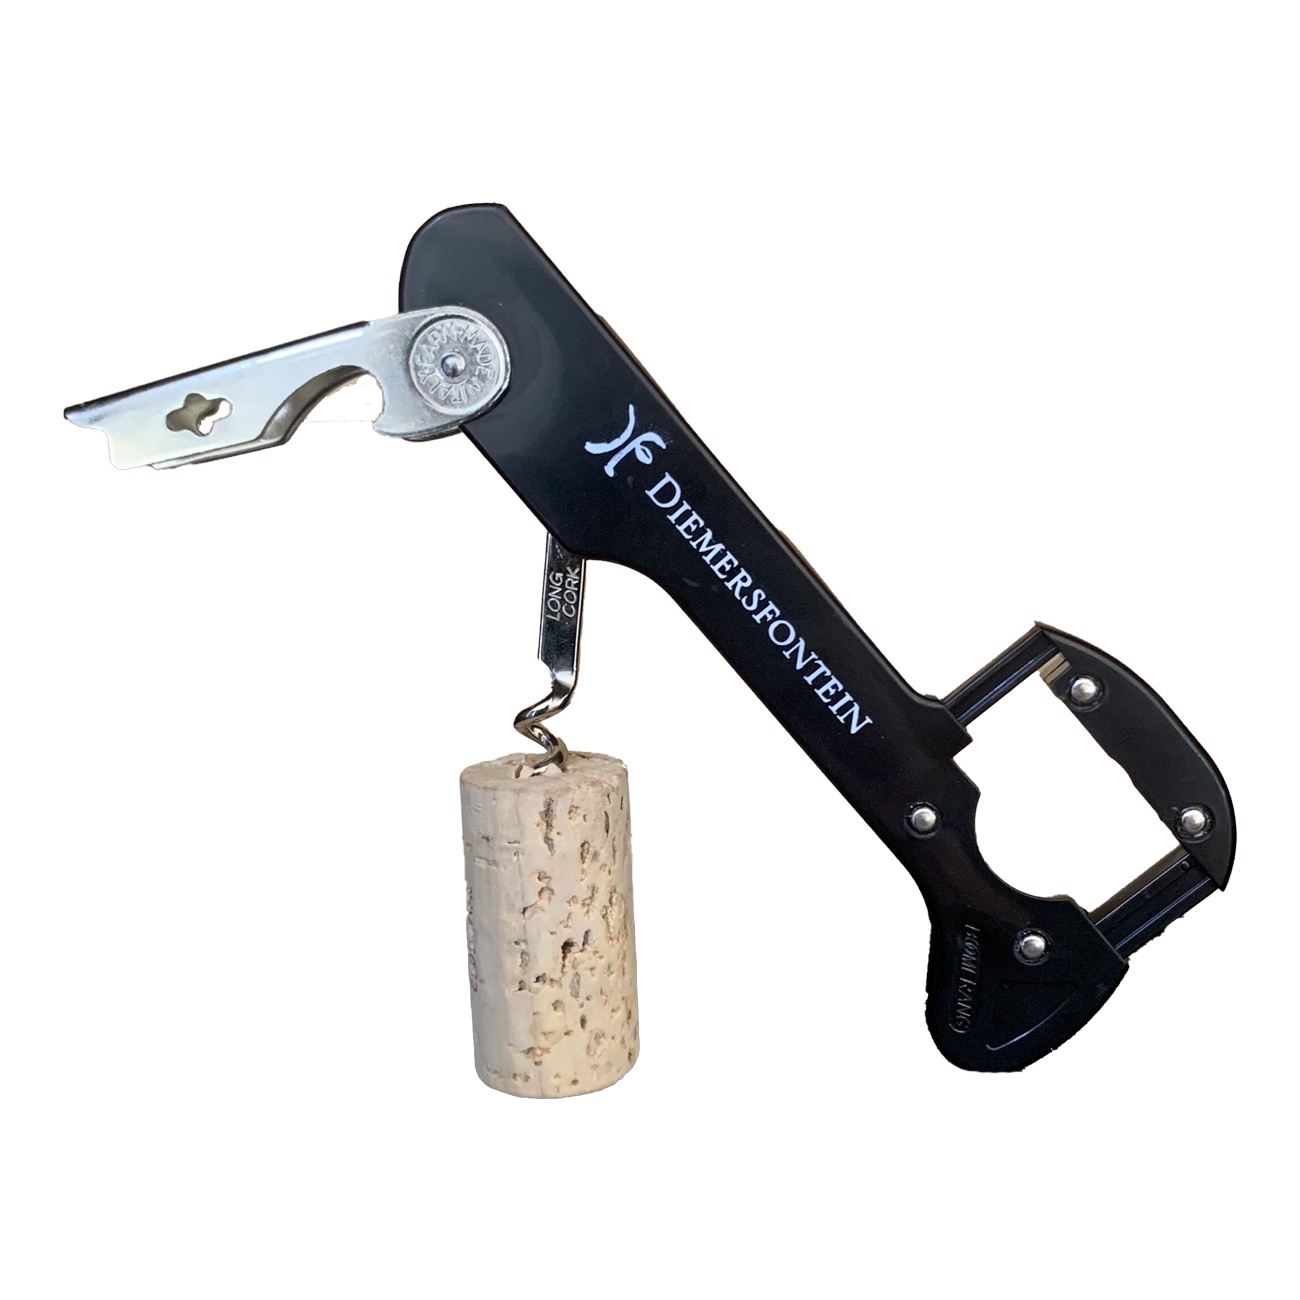 Featured image for “BOTTLE OPENER”